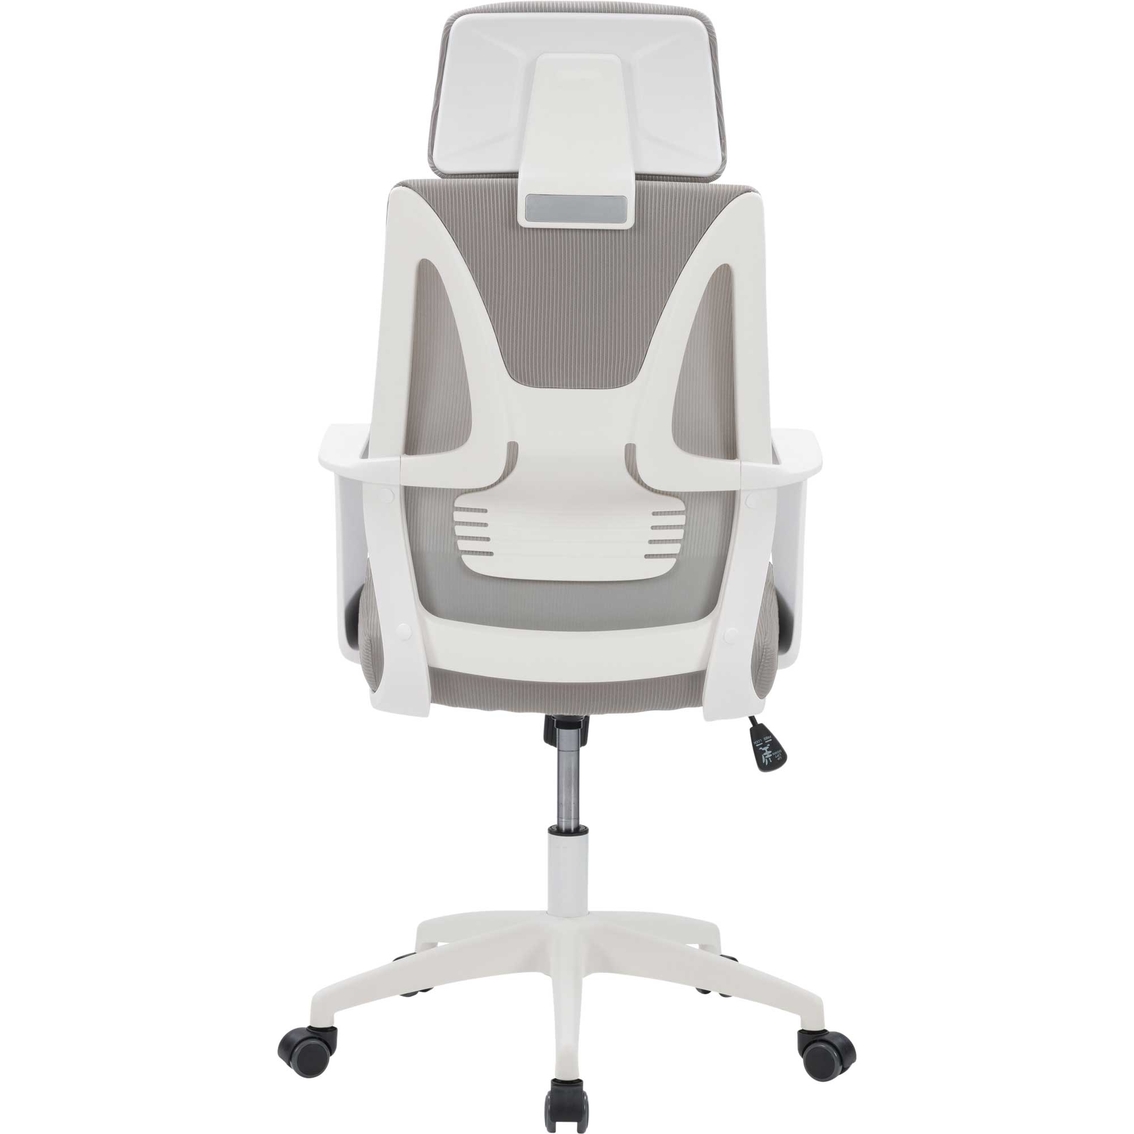 CorLiving Workspace Mesh Back Office Chair - Image 2 of 7